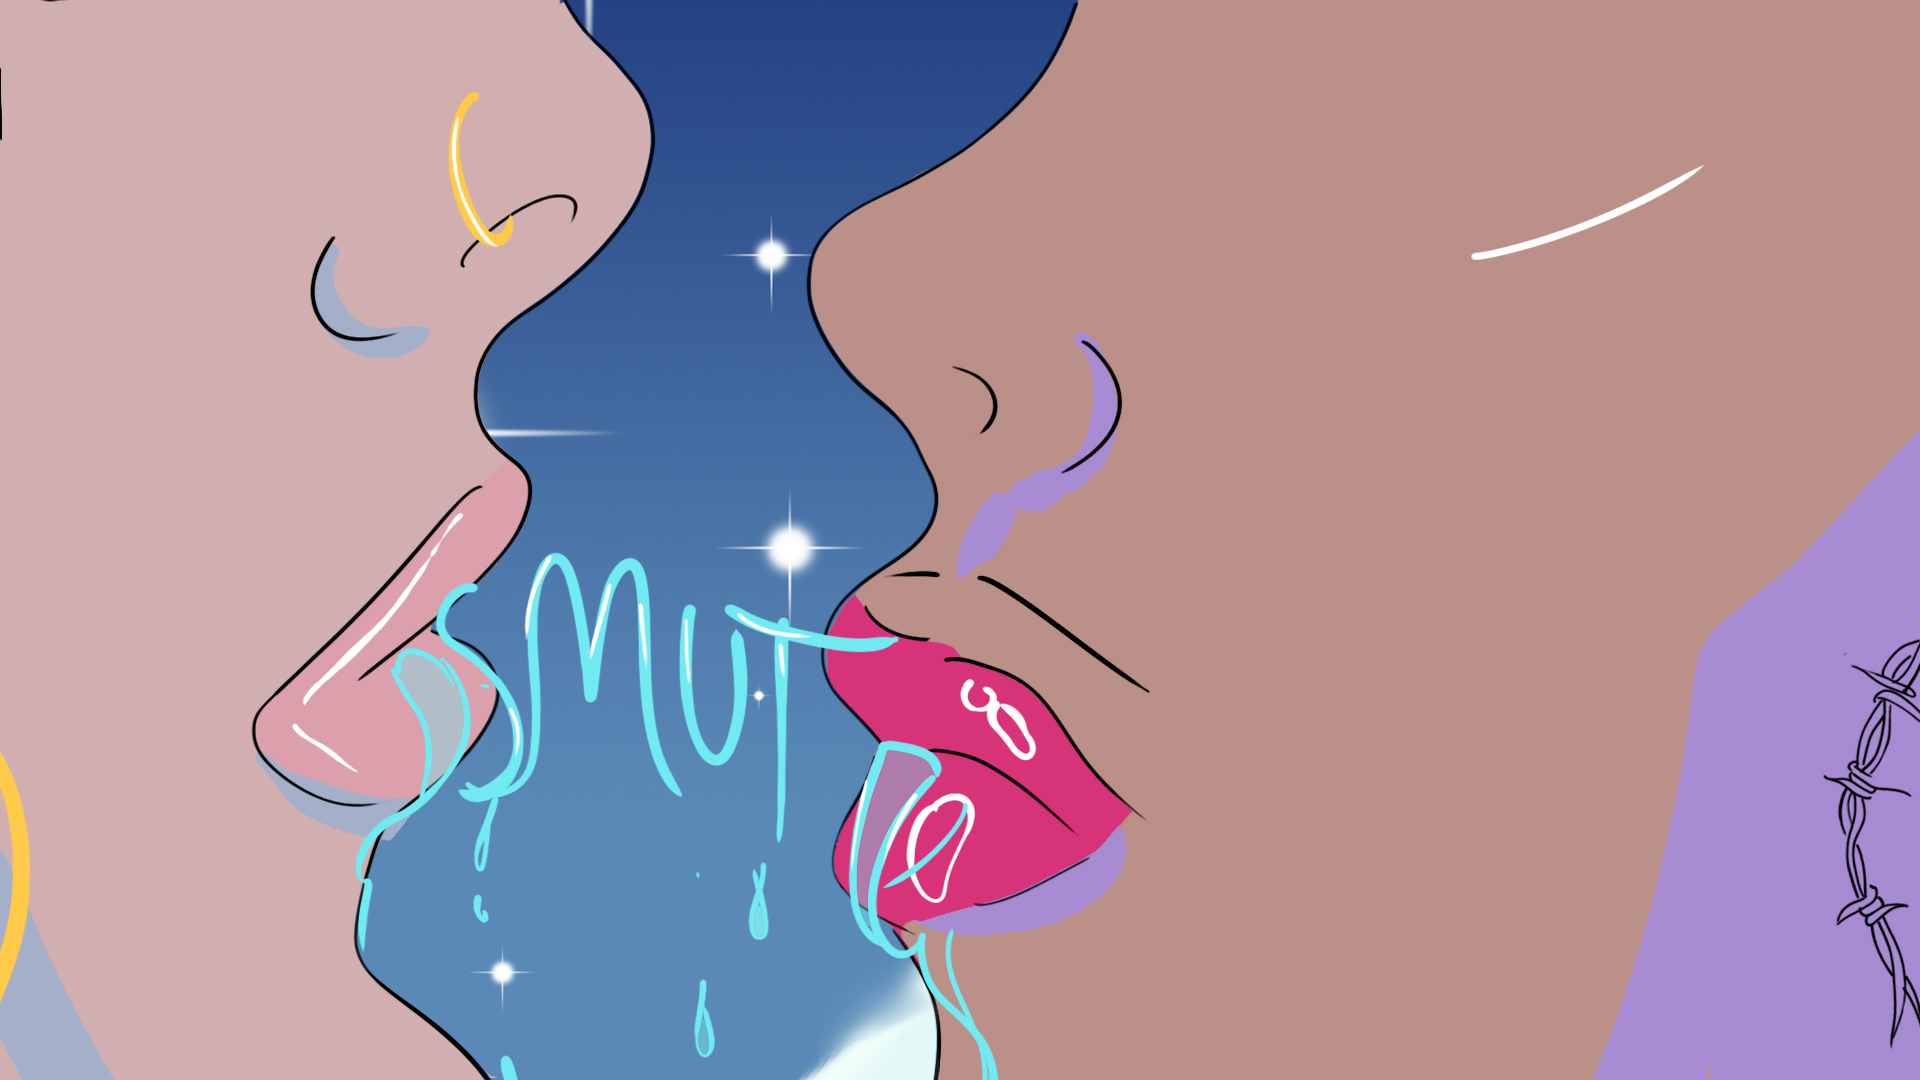 Image showing two faces in profile, one with light skin wearing a nose ring, one with darker skin and pink lipgloss, swapping spit that stretches and spells out the word "smut"